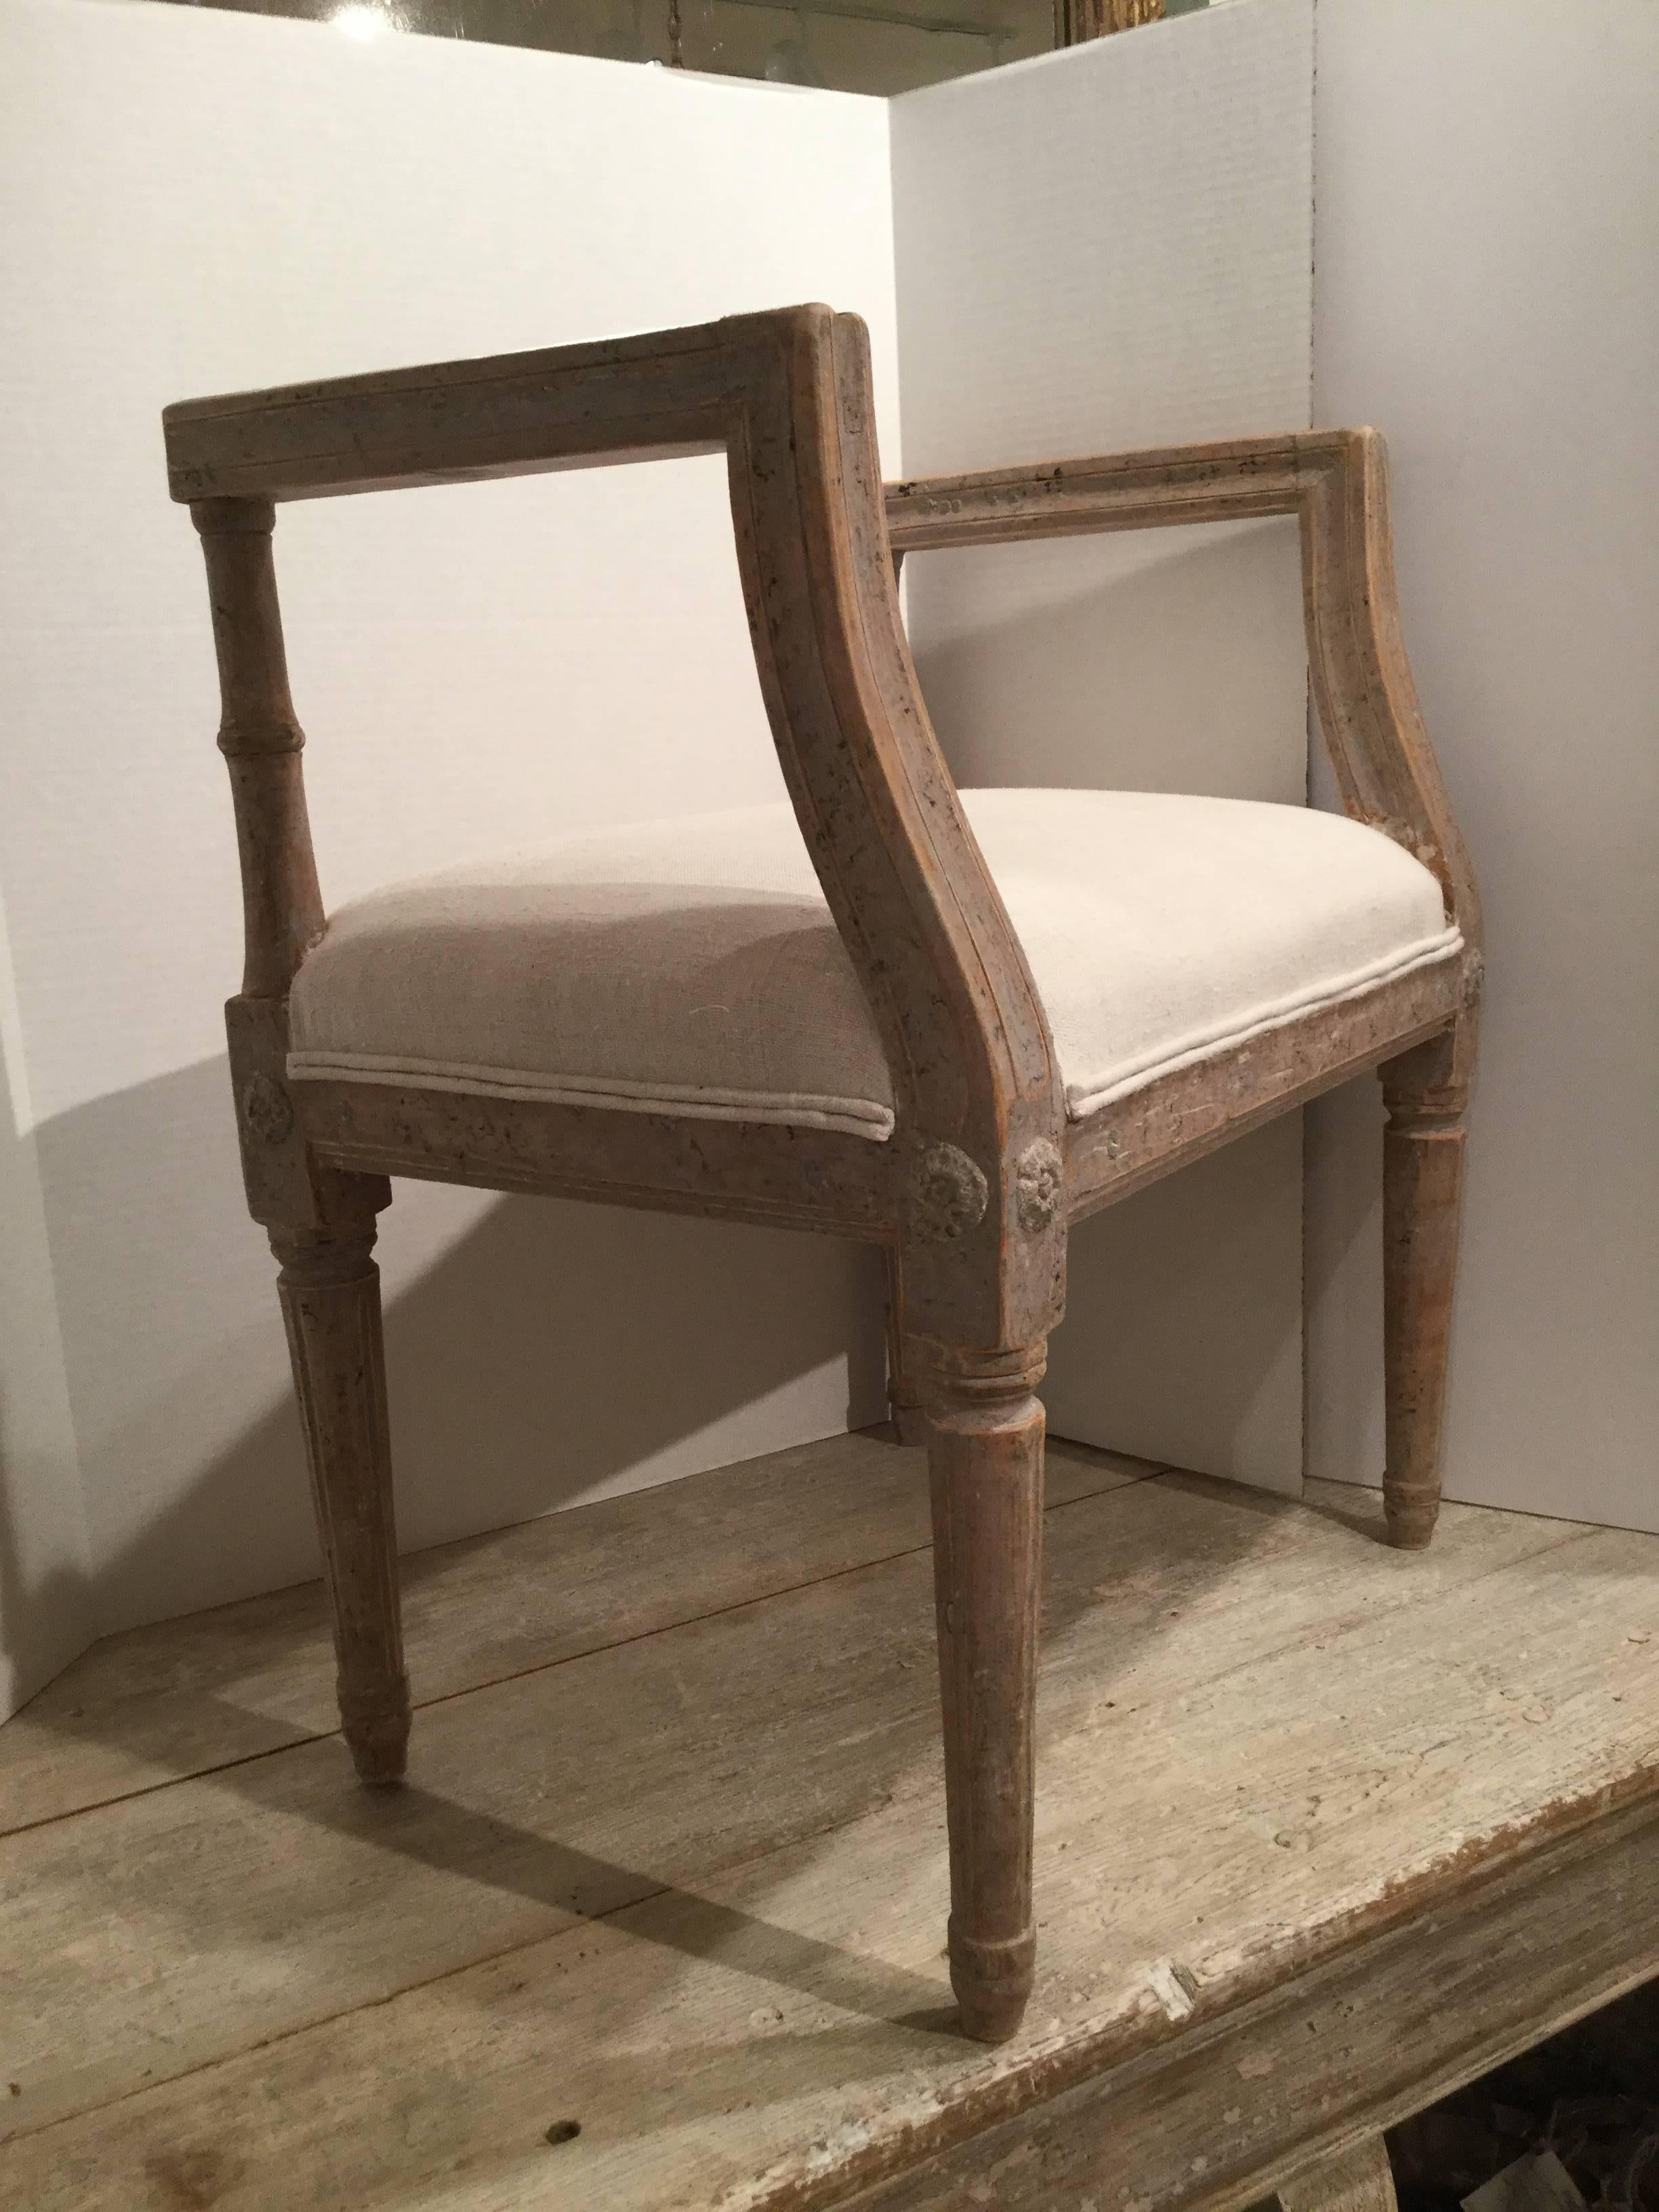 Period late 18th century Gustavian stool in original paint patina. The arms and legs have beautiful carved detail. Recently, upholstered in antique French white linen.